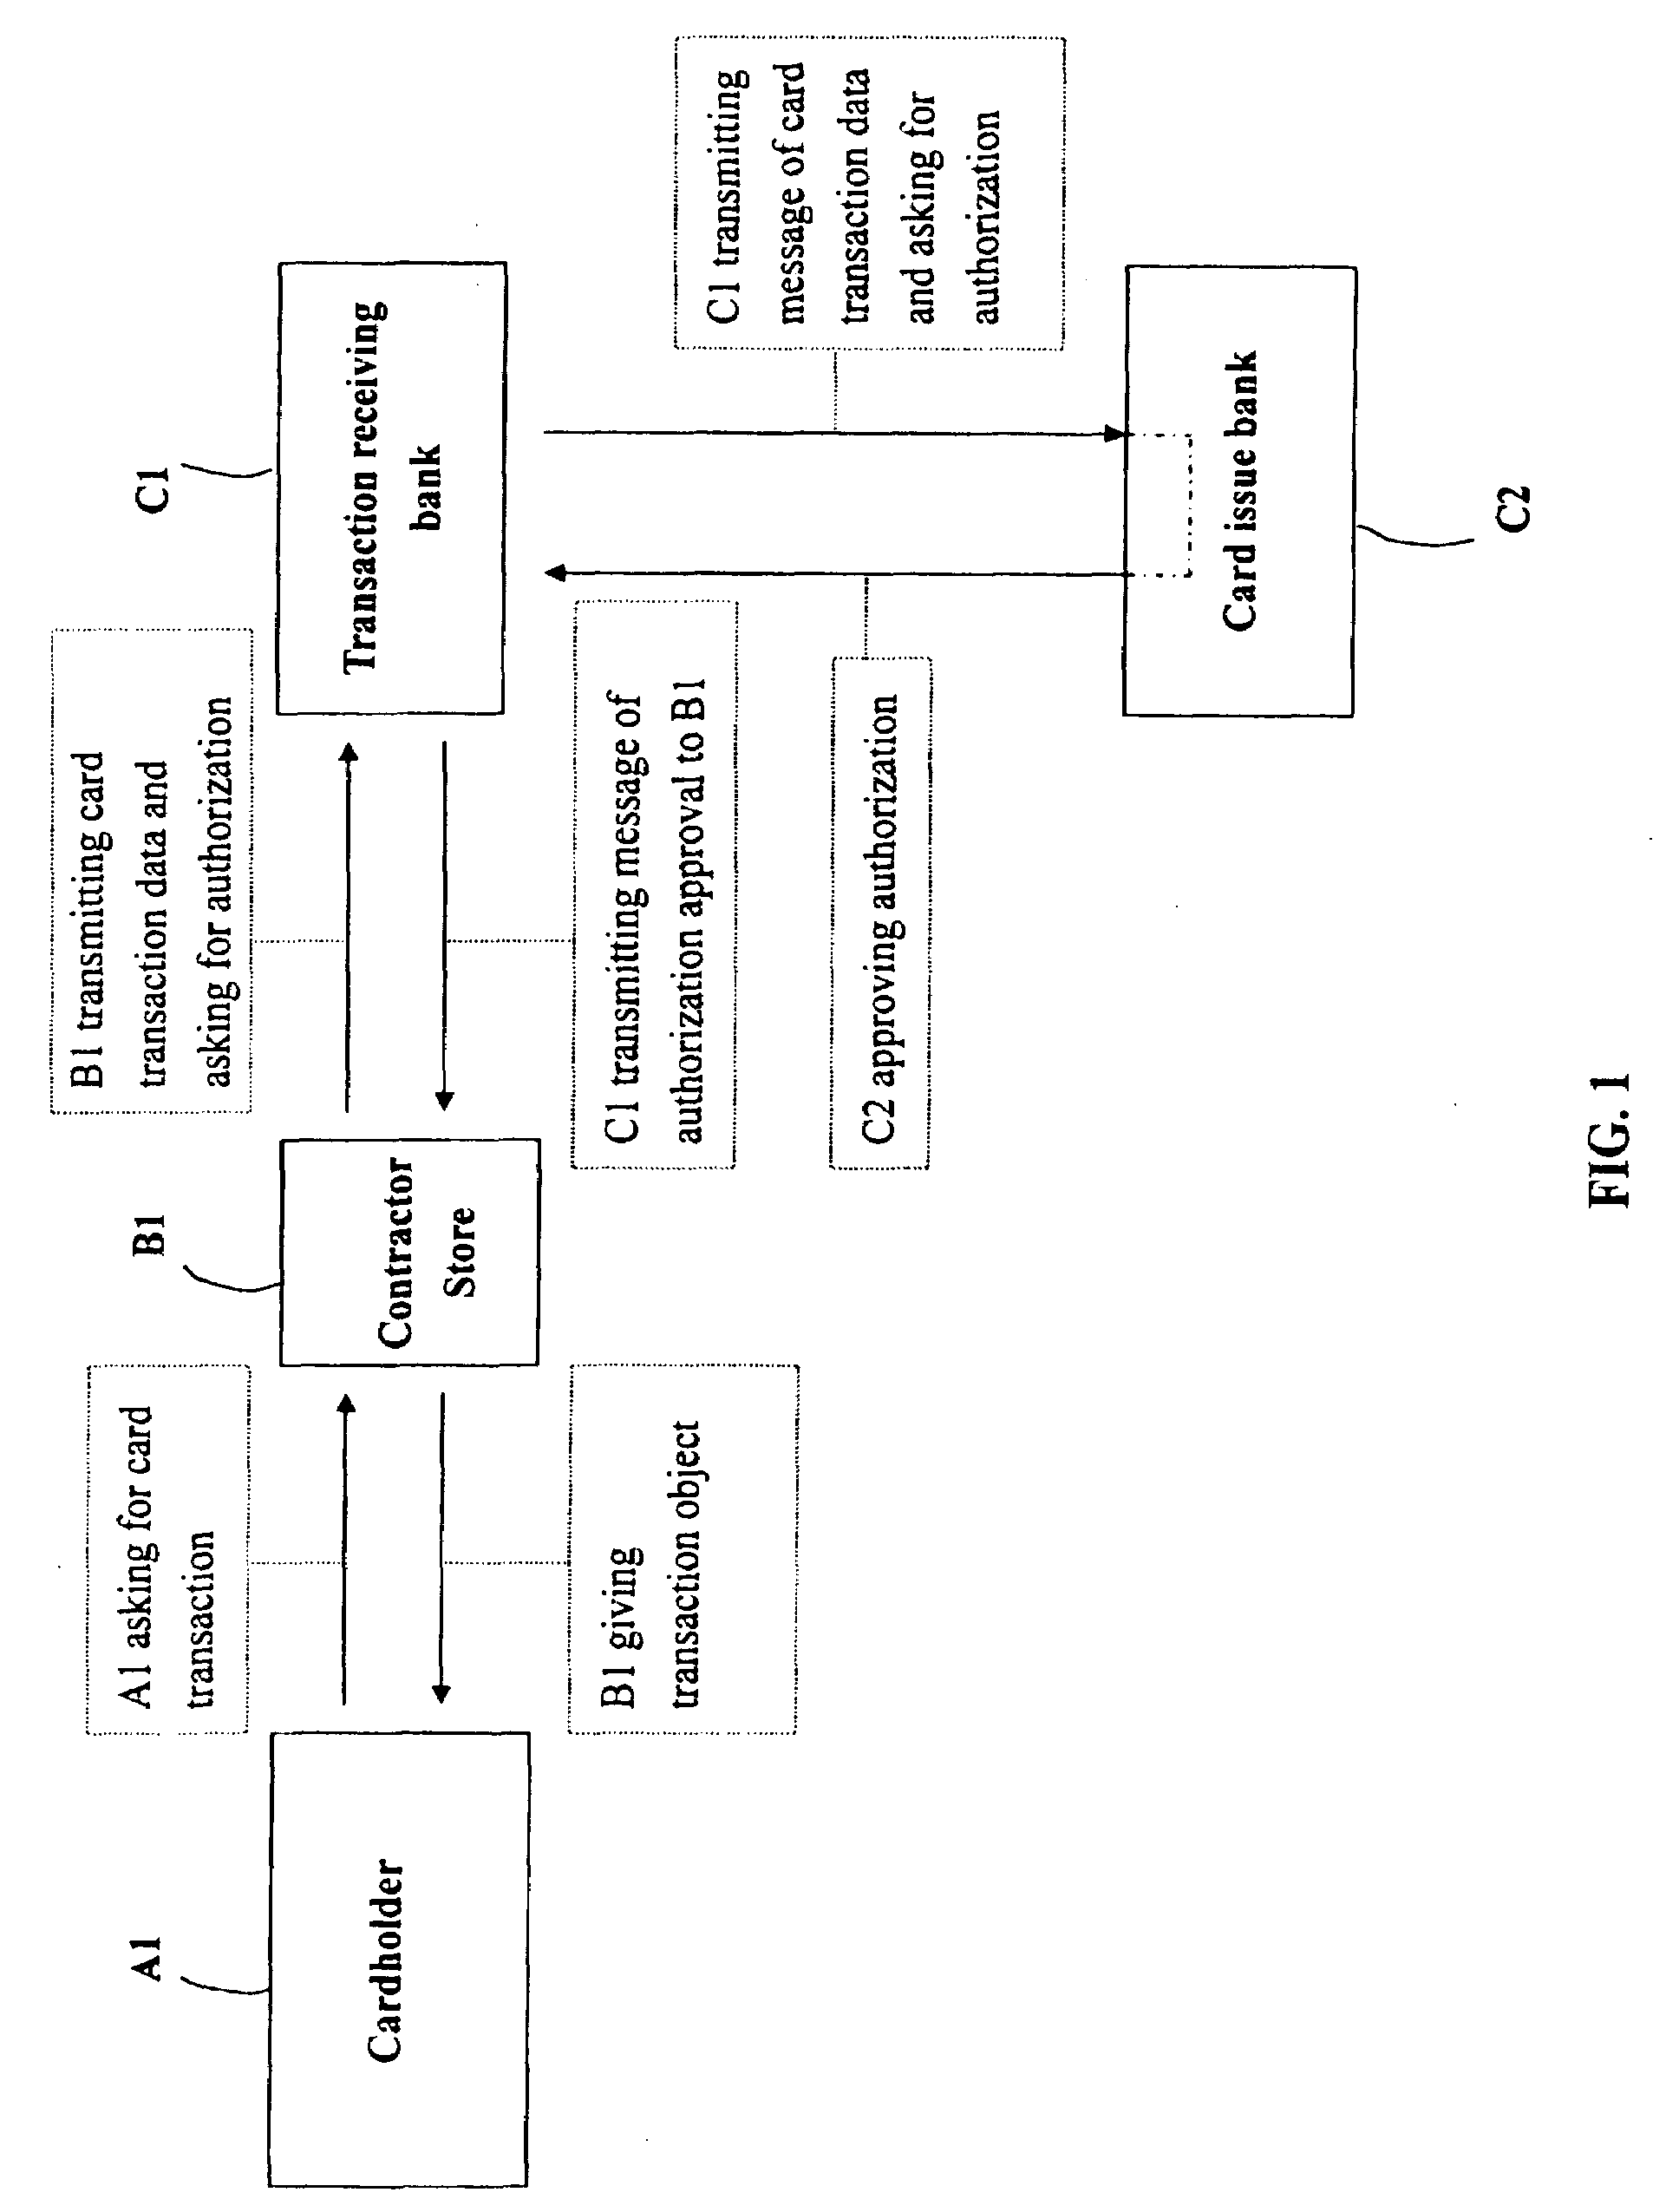 Method for securing card transaction by using mobile device